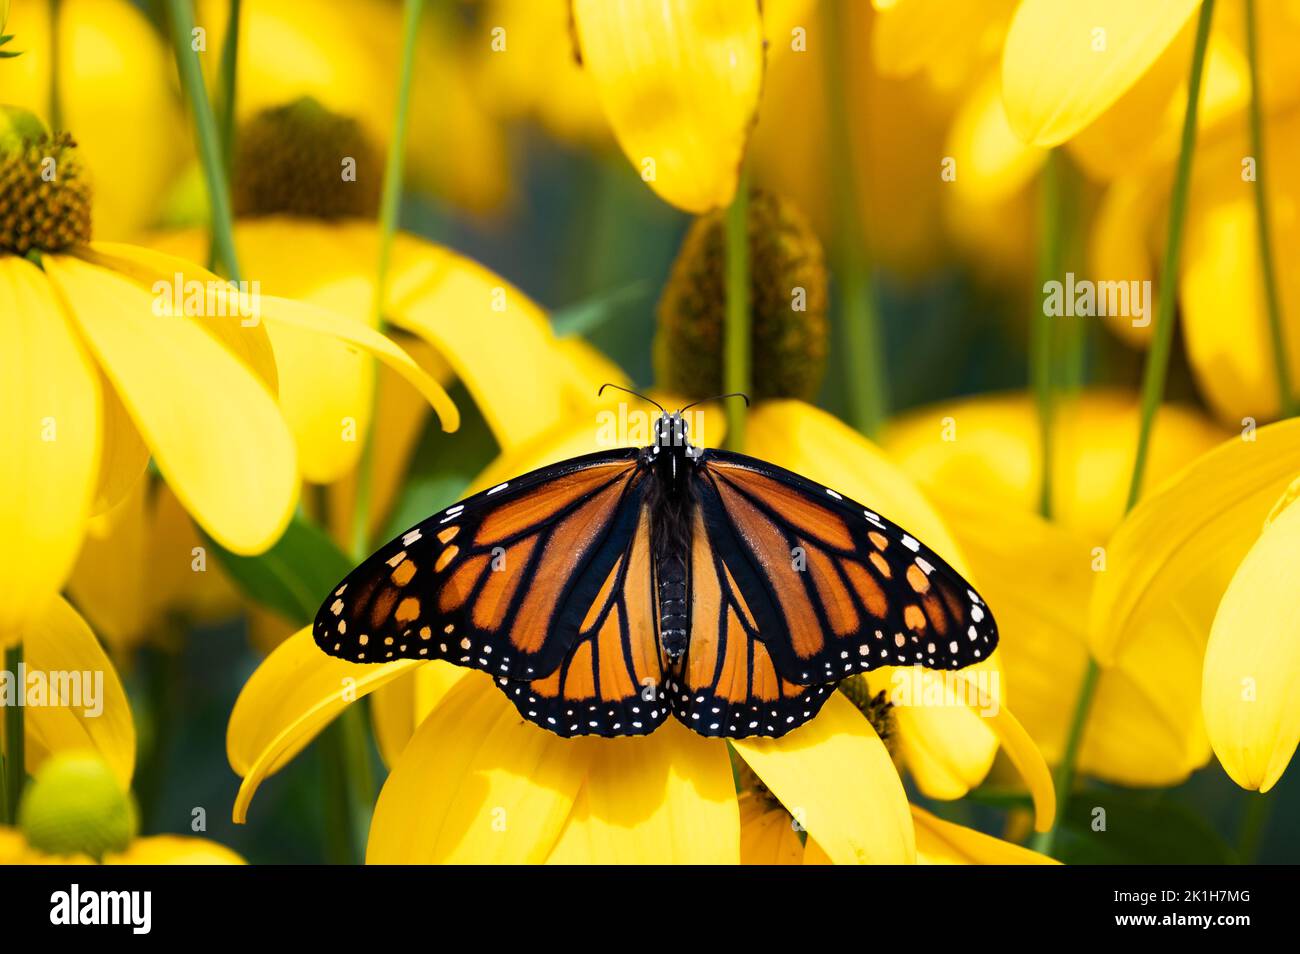 A Monarch Butterfly, Danaus plexippus, drying its wings and pollinating a Rudbeckia flower in a garden in Speculator, NY USA Stock Photo